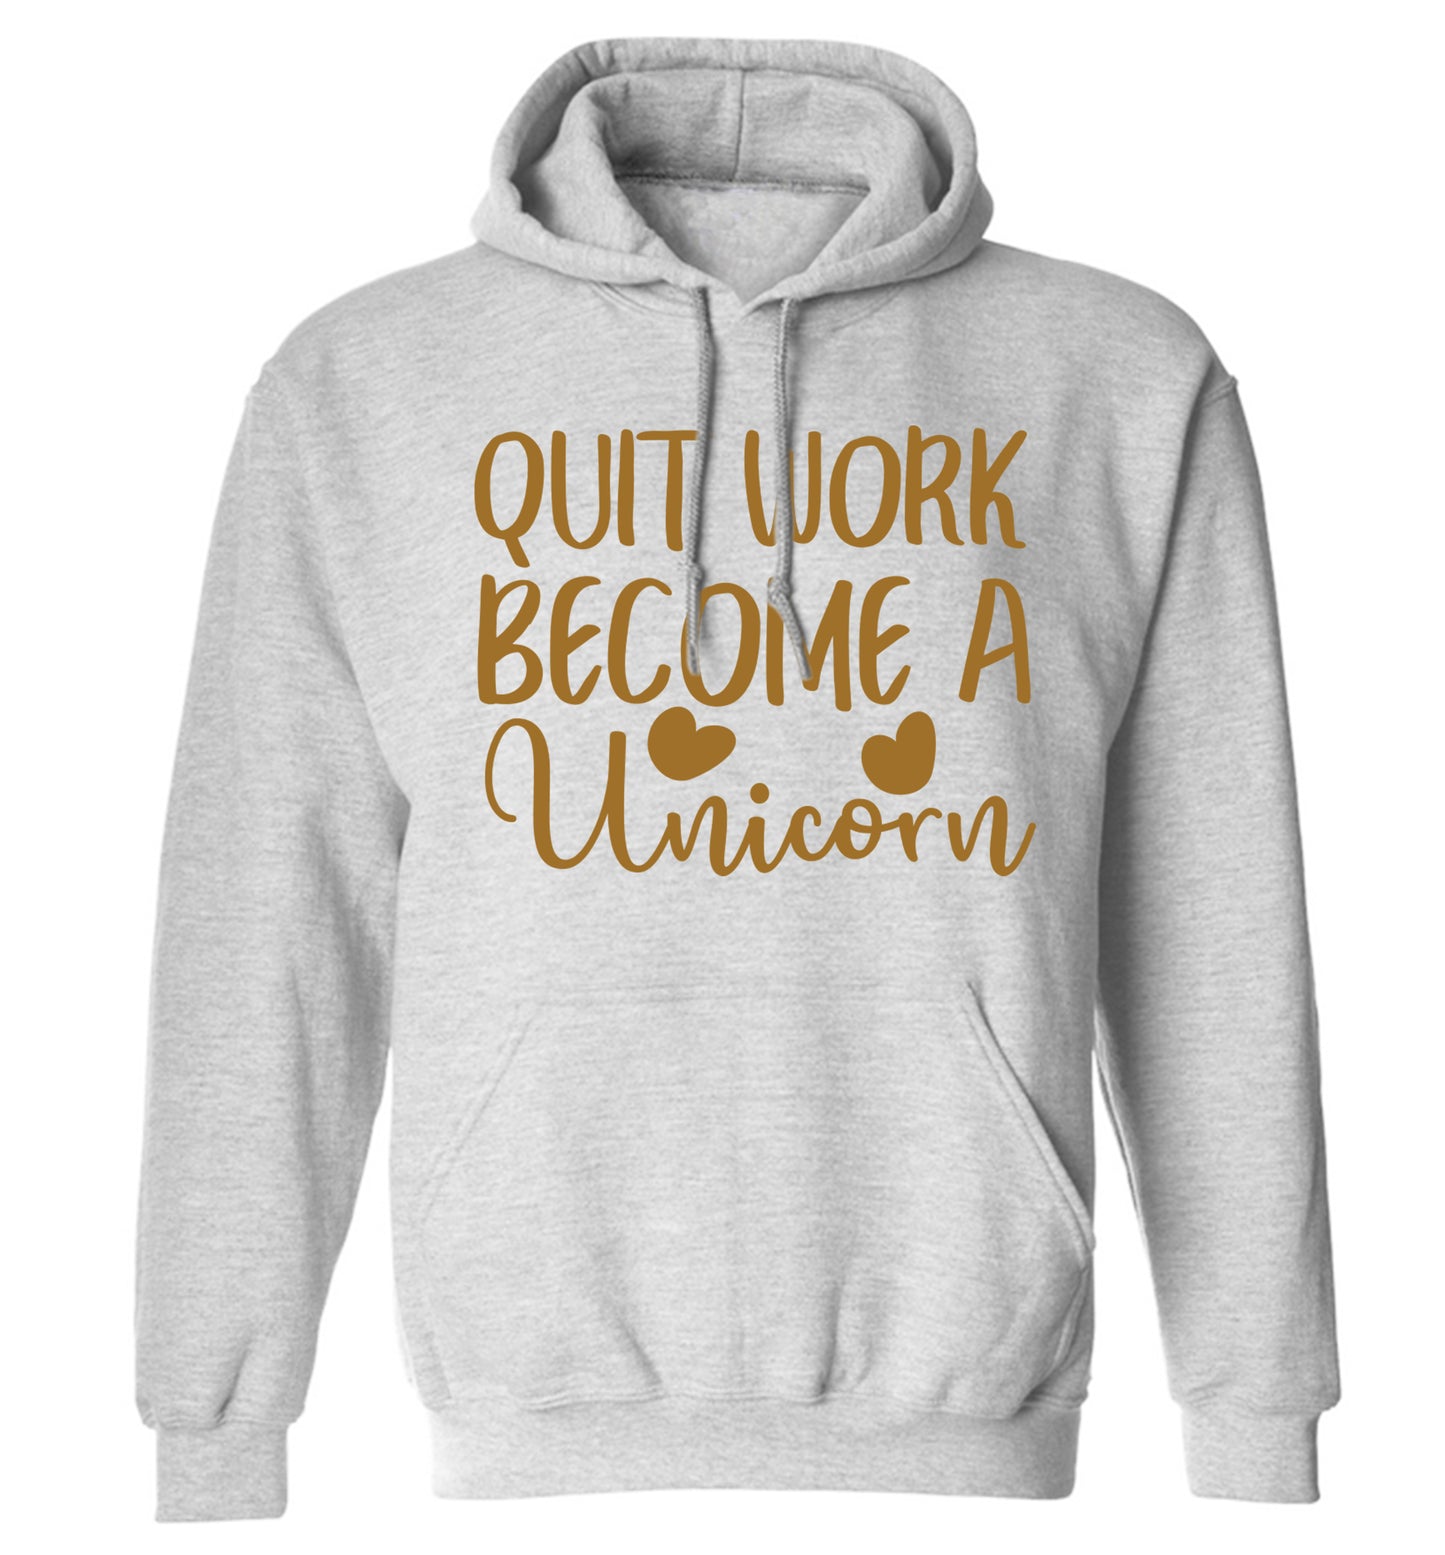 Quit work become a unicorn adults unisex grey hoodie 2XL